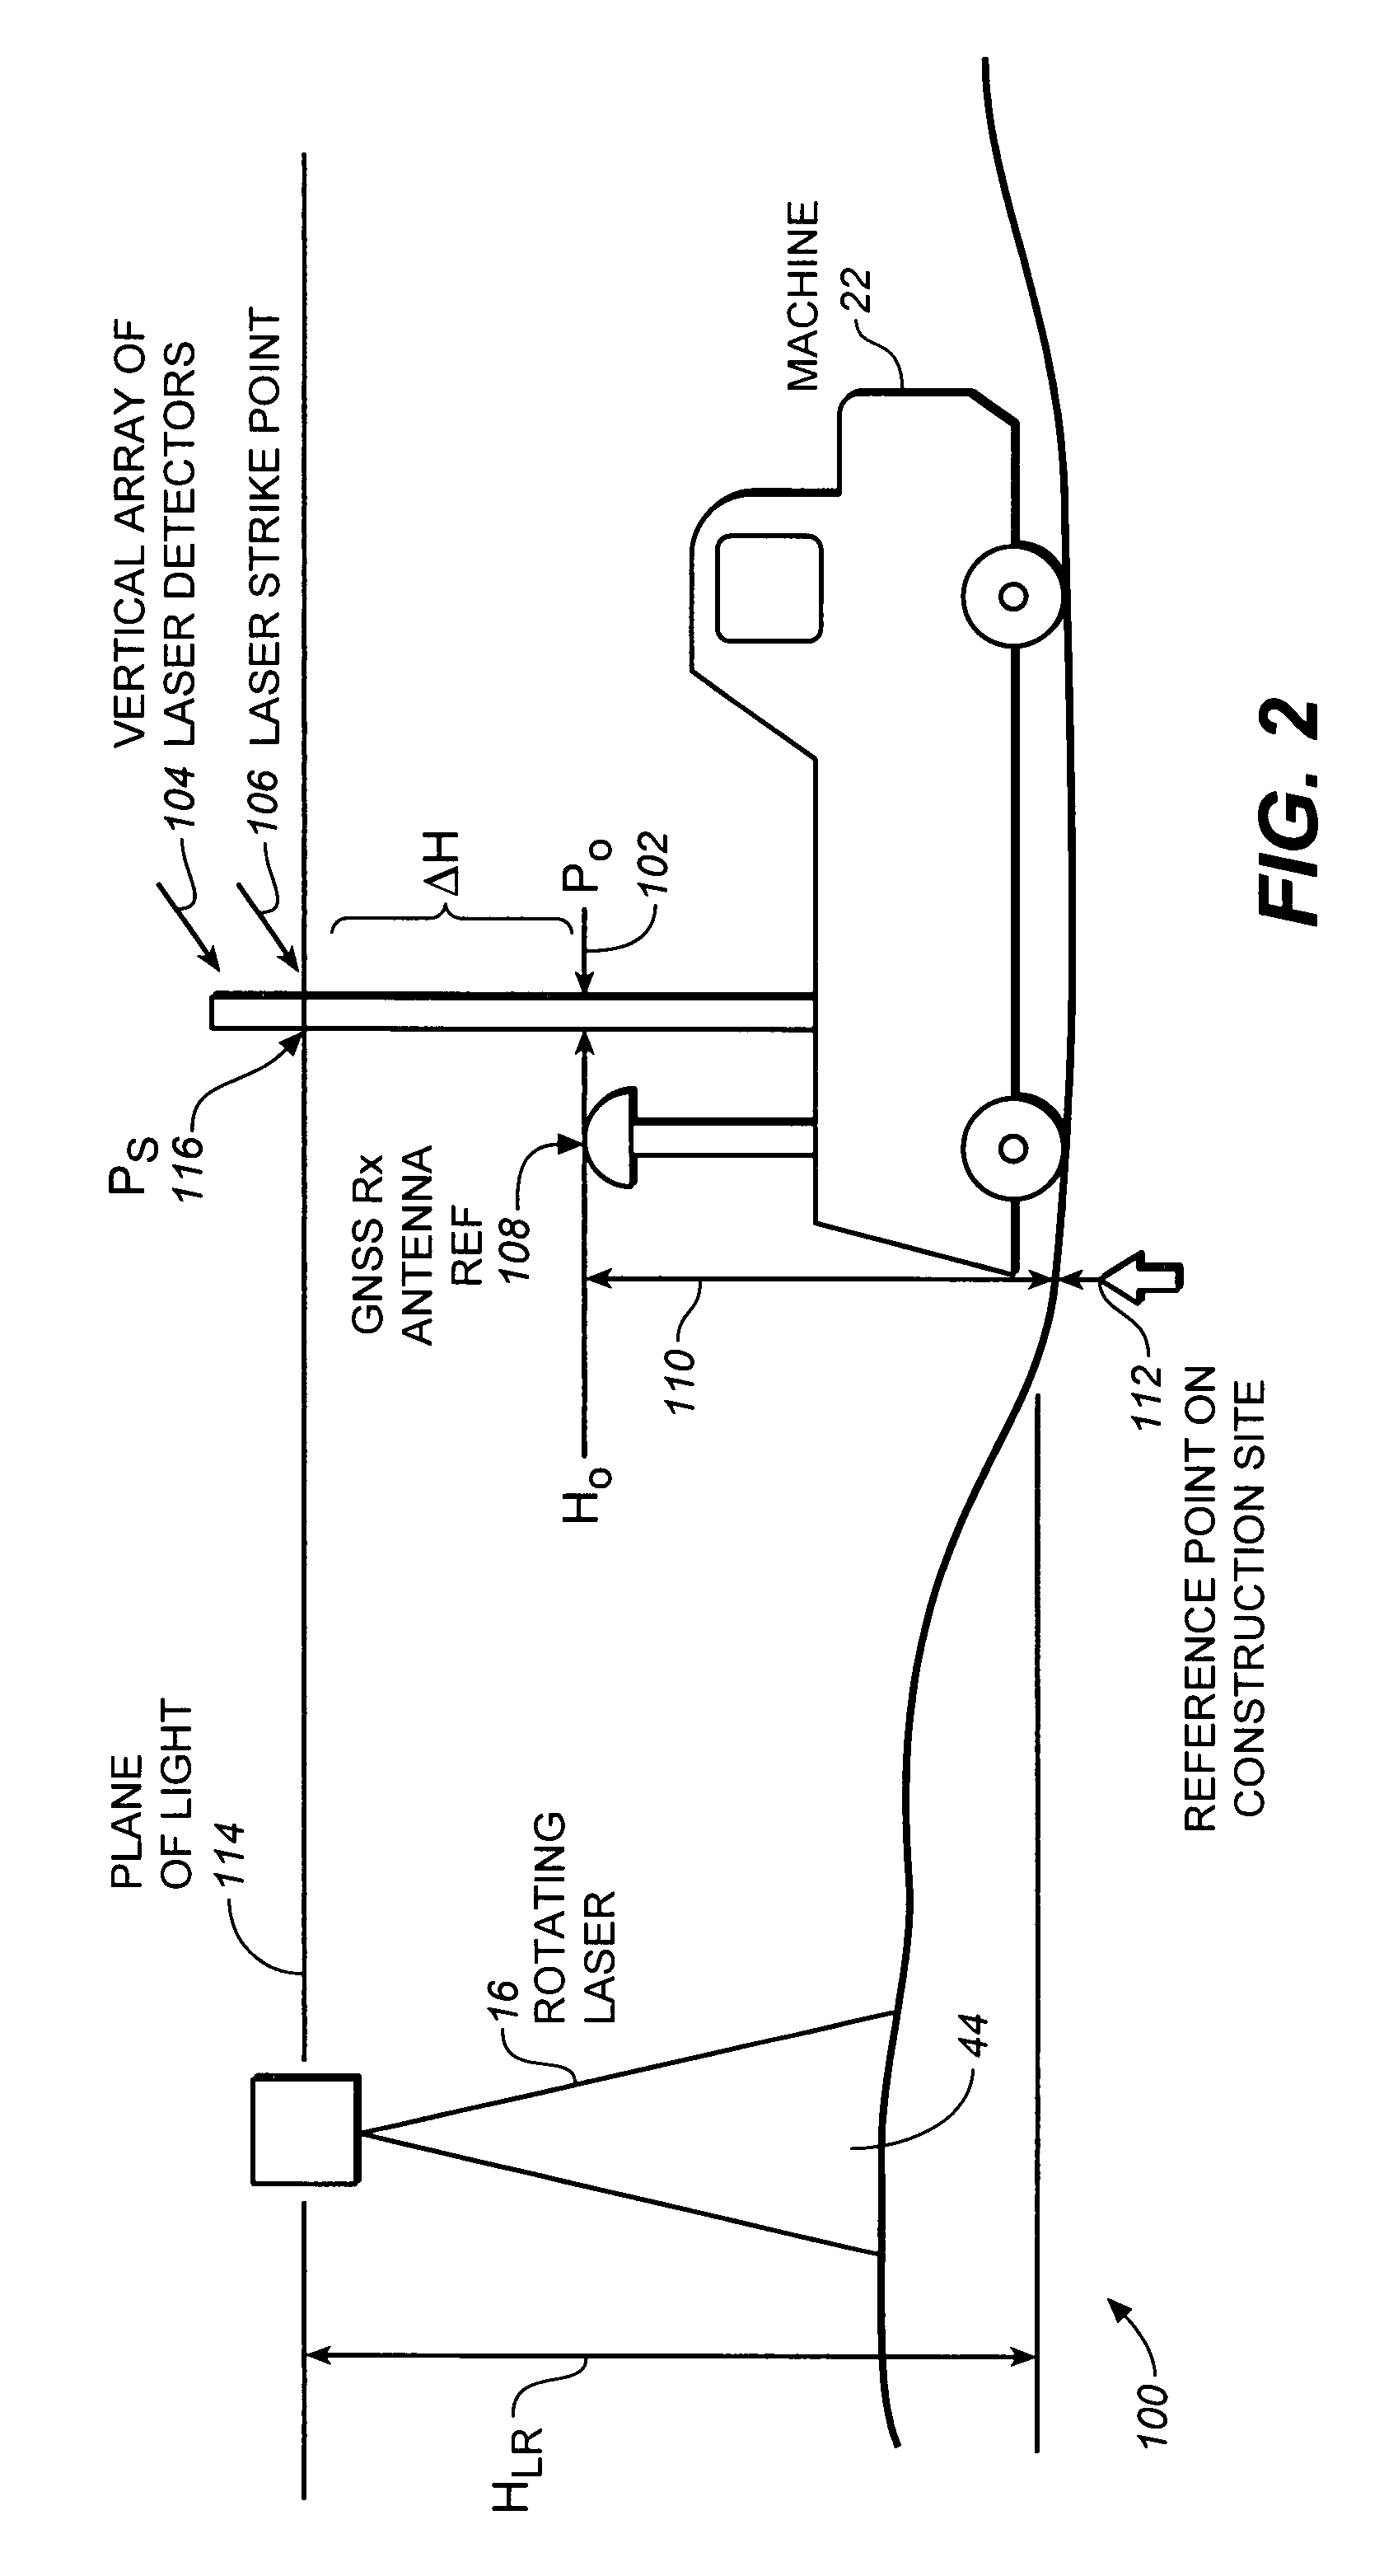 Position determination system using radio and laser in combination